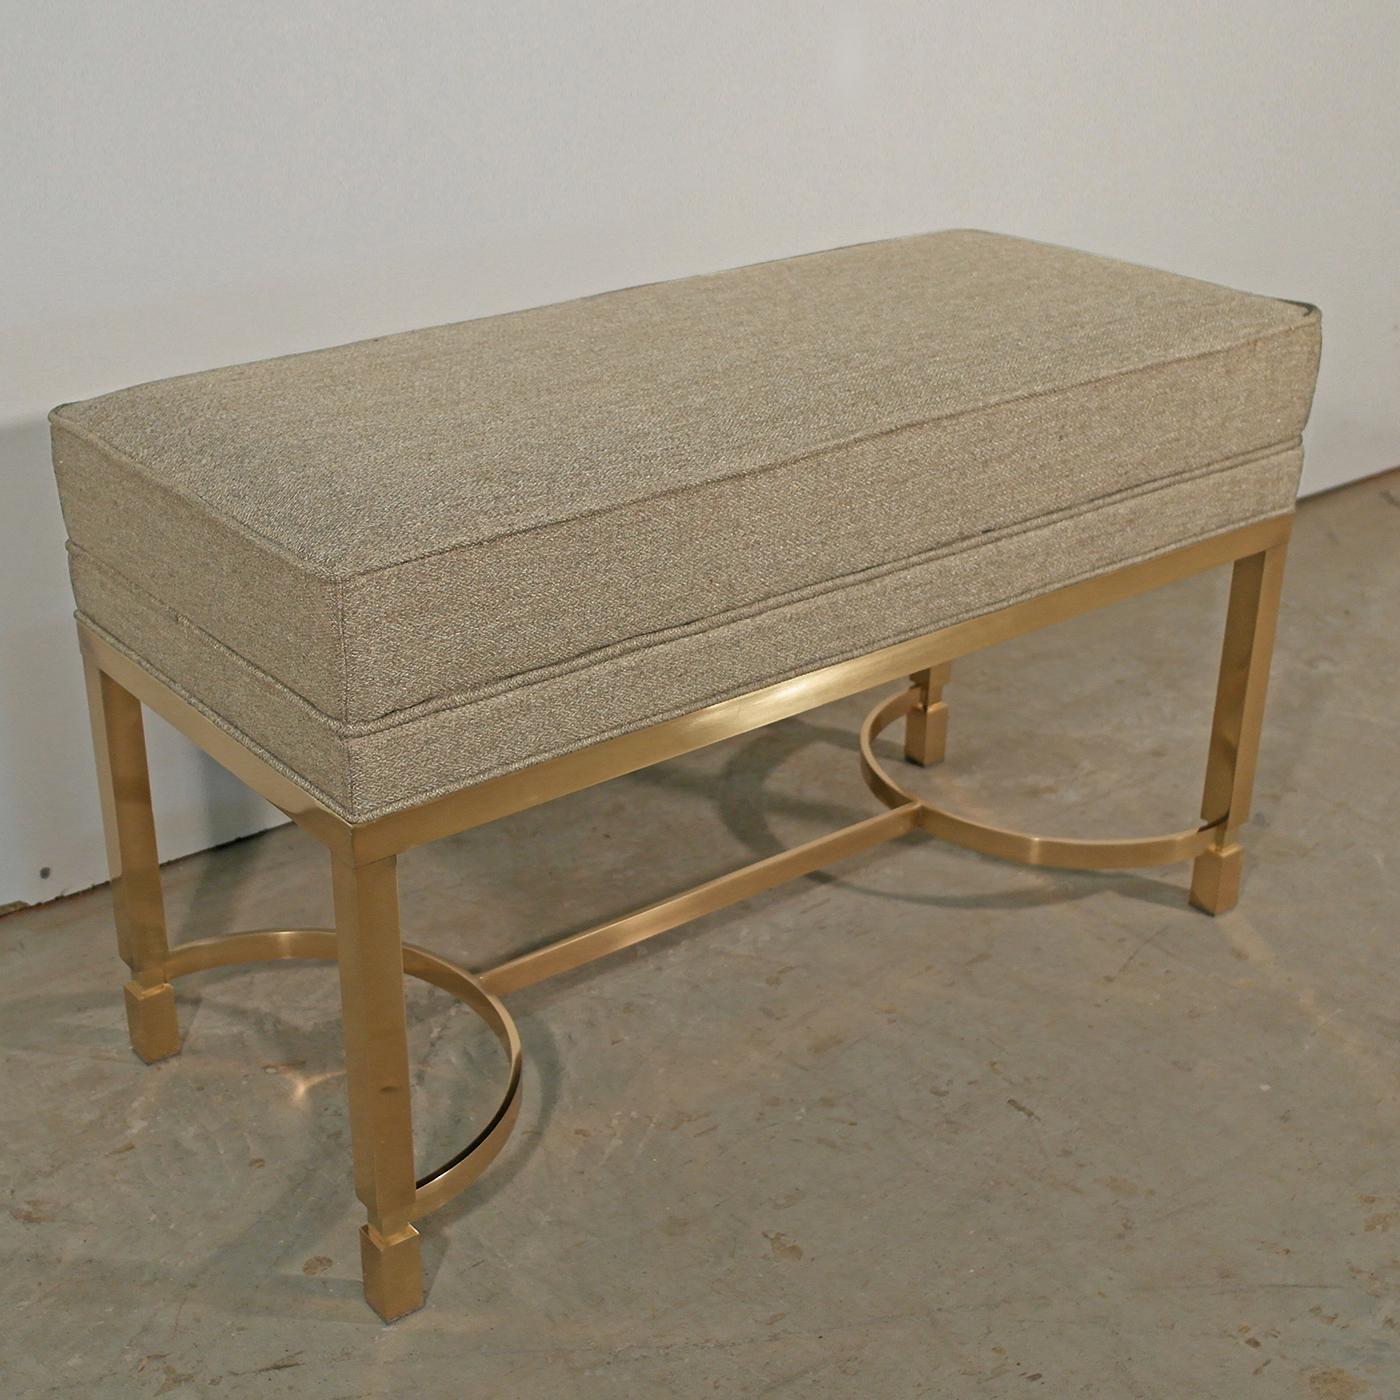 Exuding a modern elegance, this sophisticated bench is the perfect addition to the hallway or bedroom. Its polished brass base is characterized by semi-circular details, topped with a padded seat upholstered in soft gray fabric. Defined by sleek